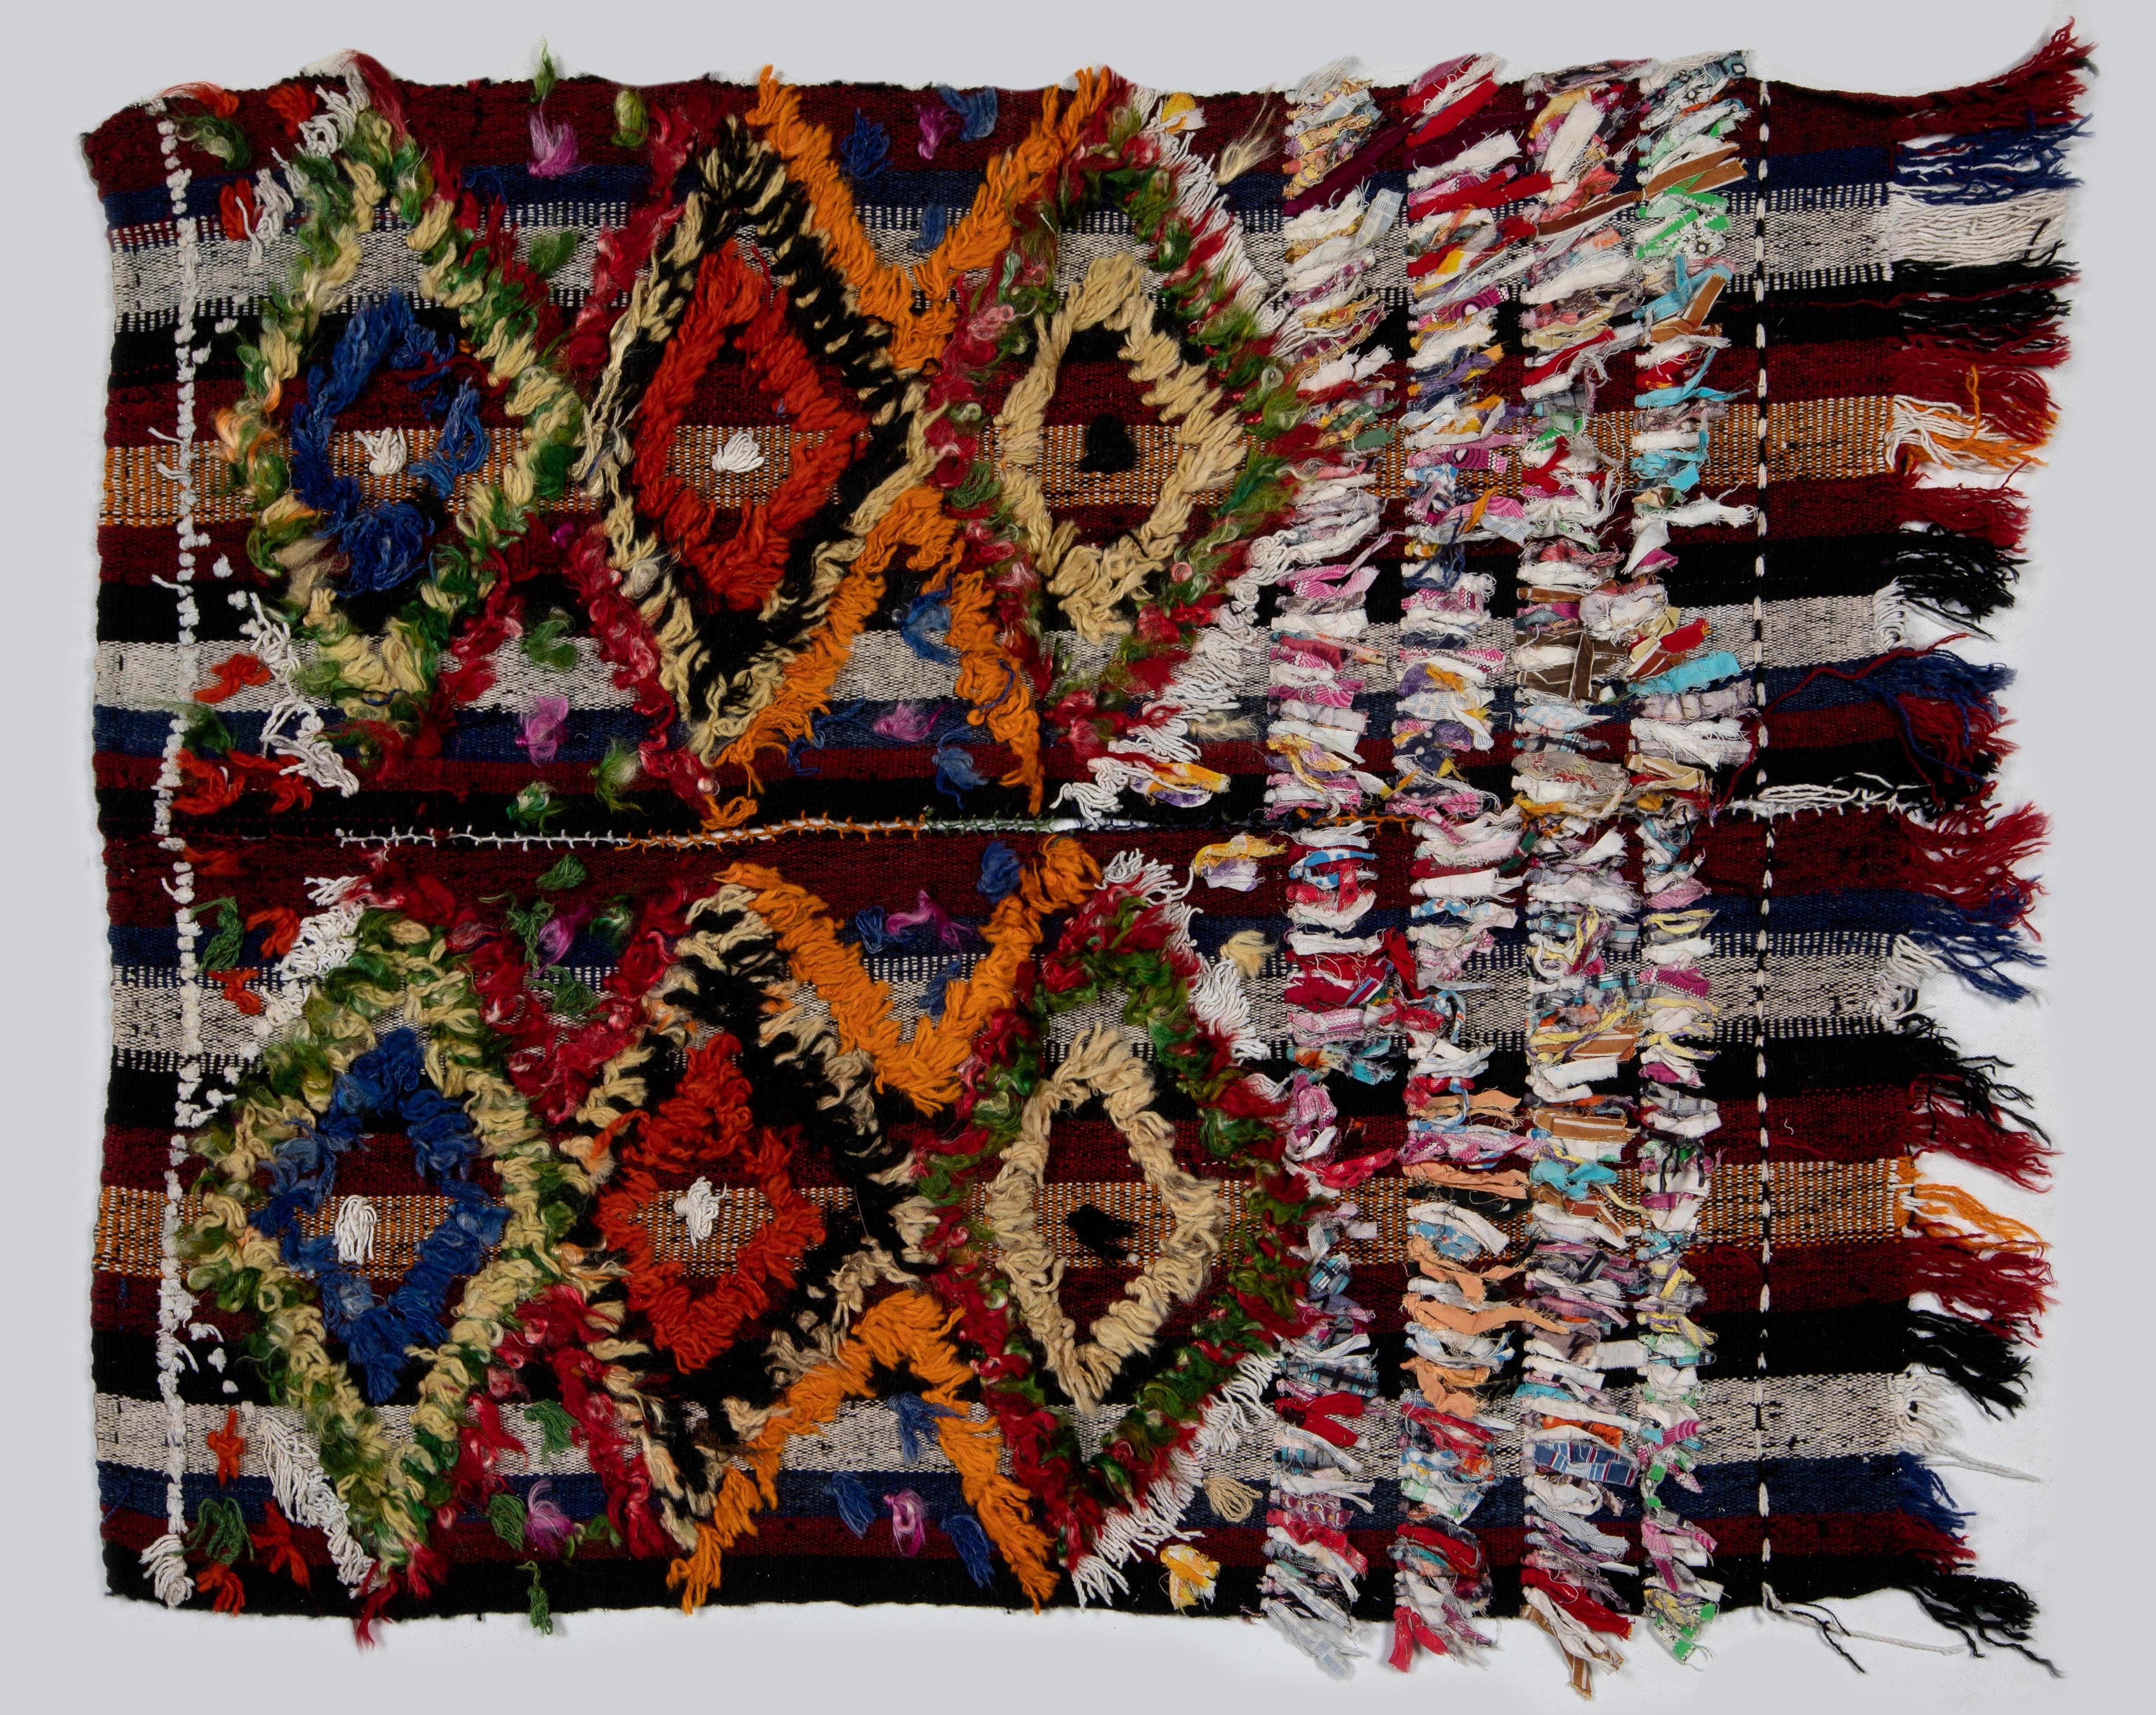 Hand-Woven 3x3.5 Ft Handmade Turkish 1970s Kilim with Colorful Poms. Bed, Floor, Sofa Cover For Sale